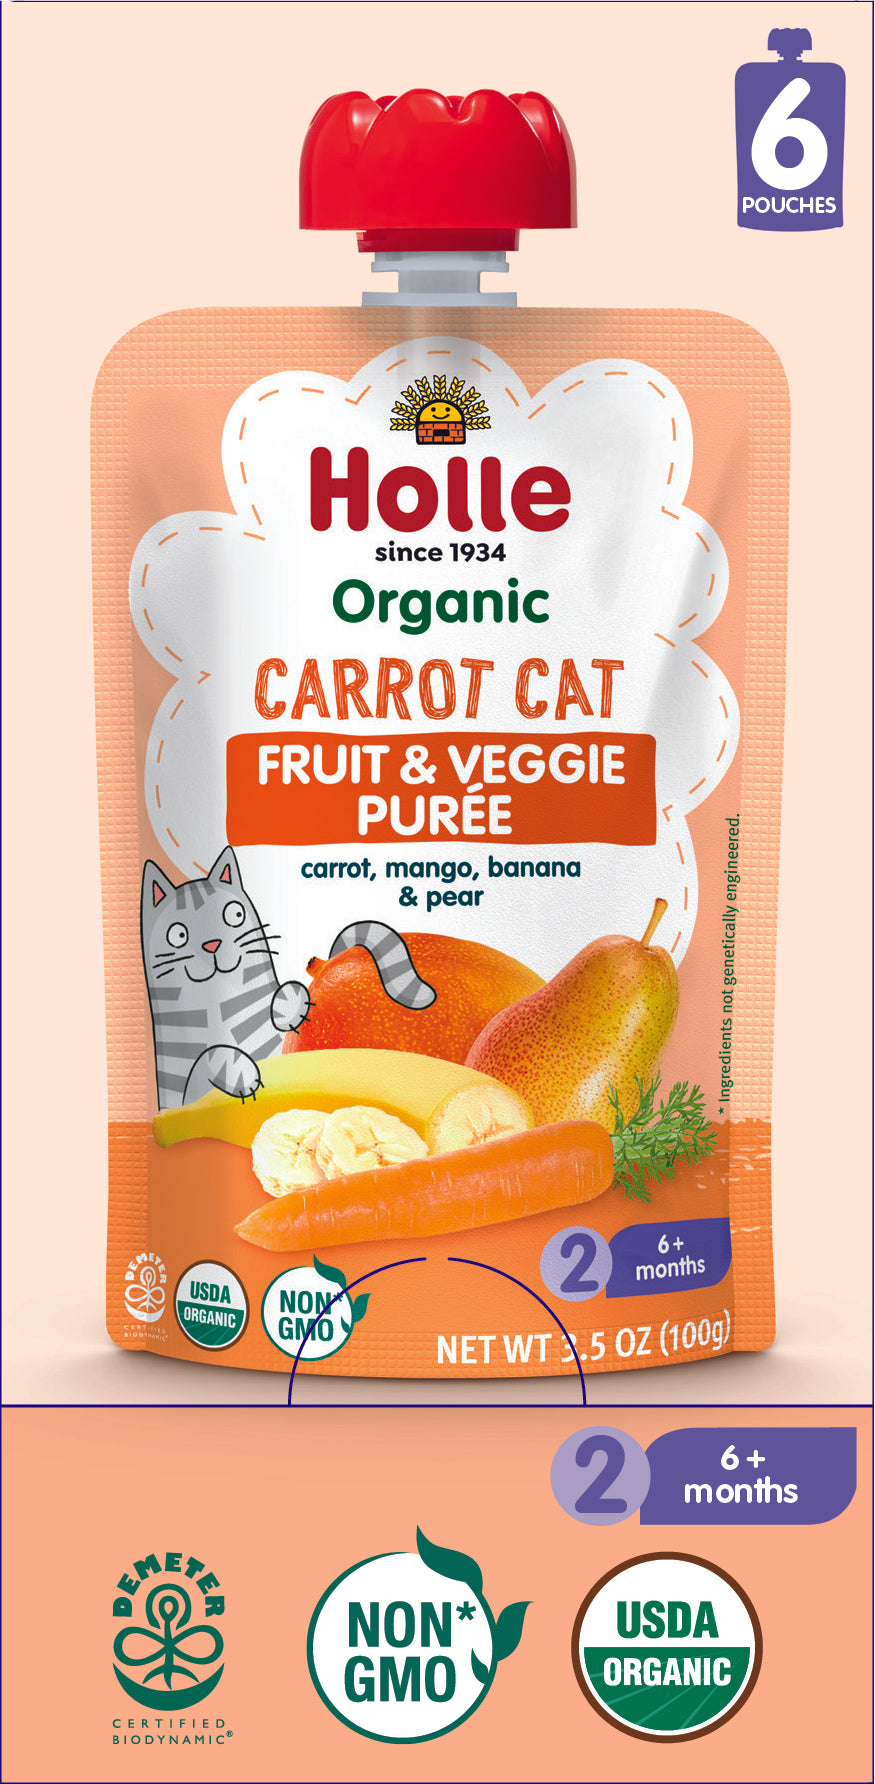 Carrot Cat: front of box